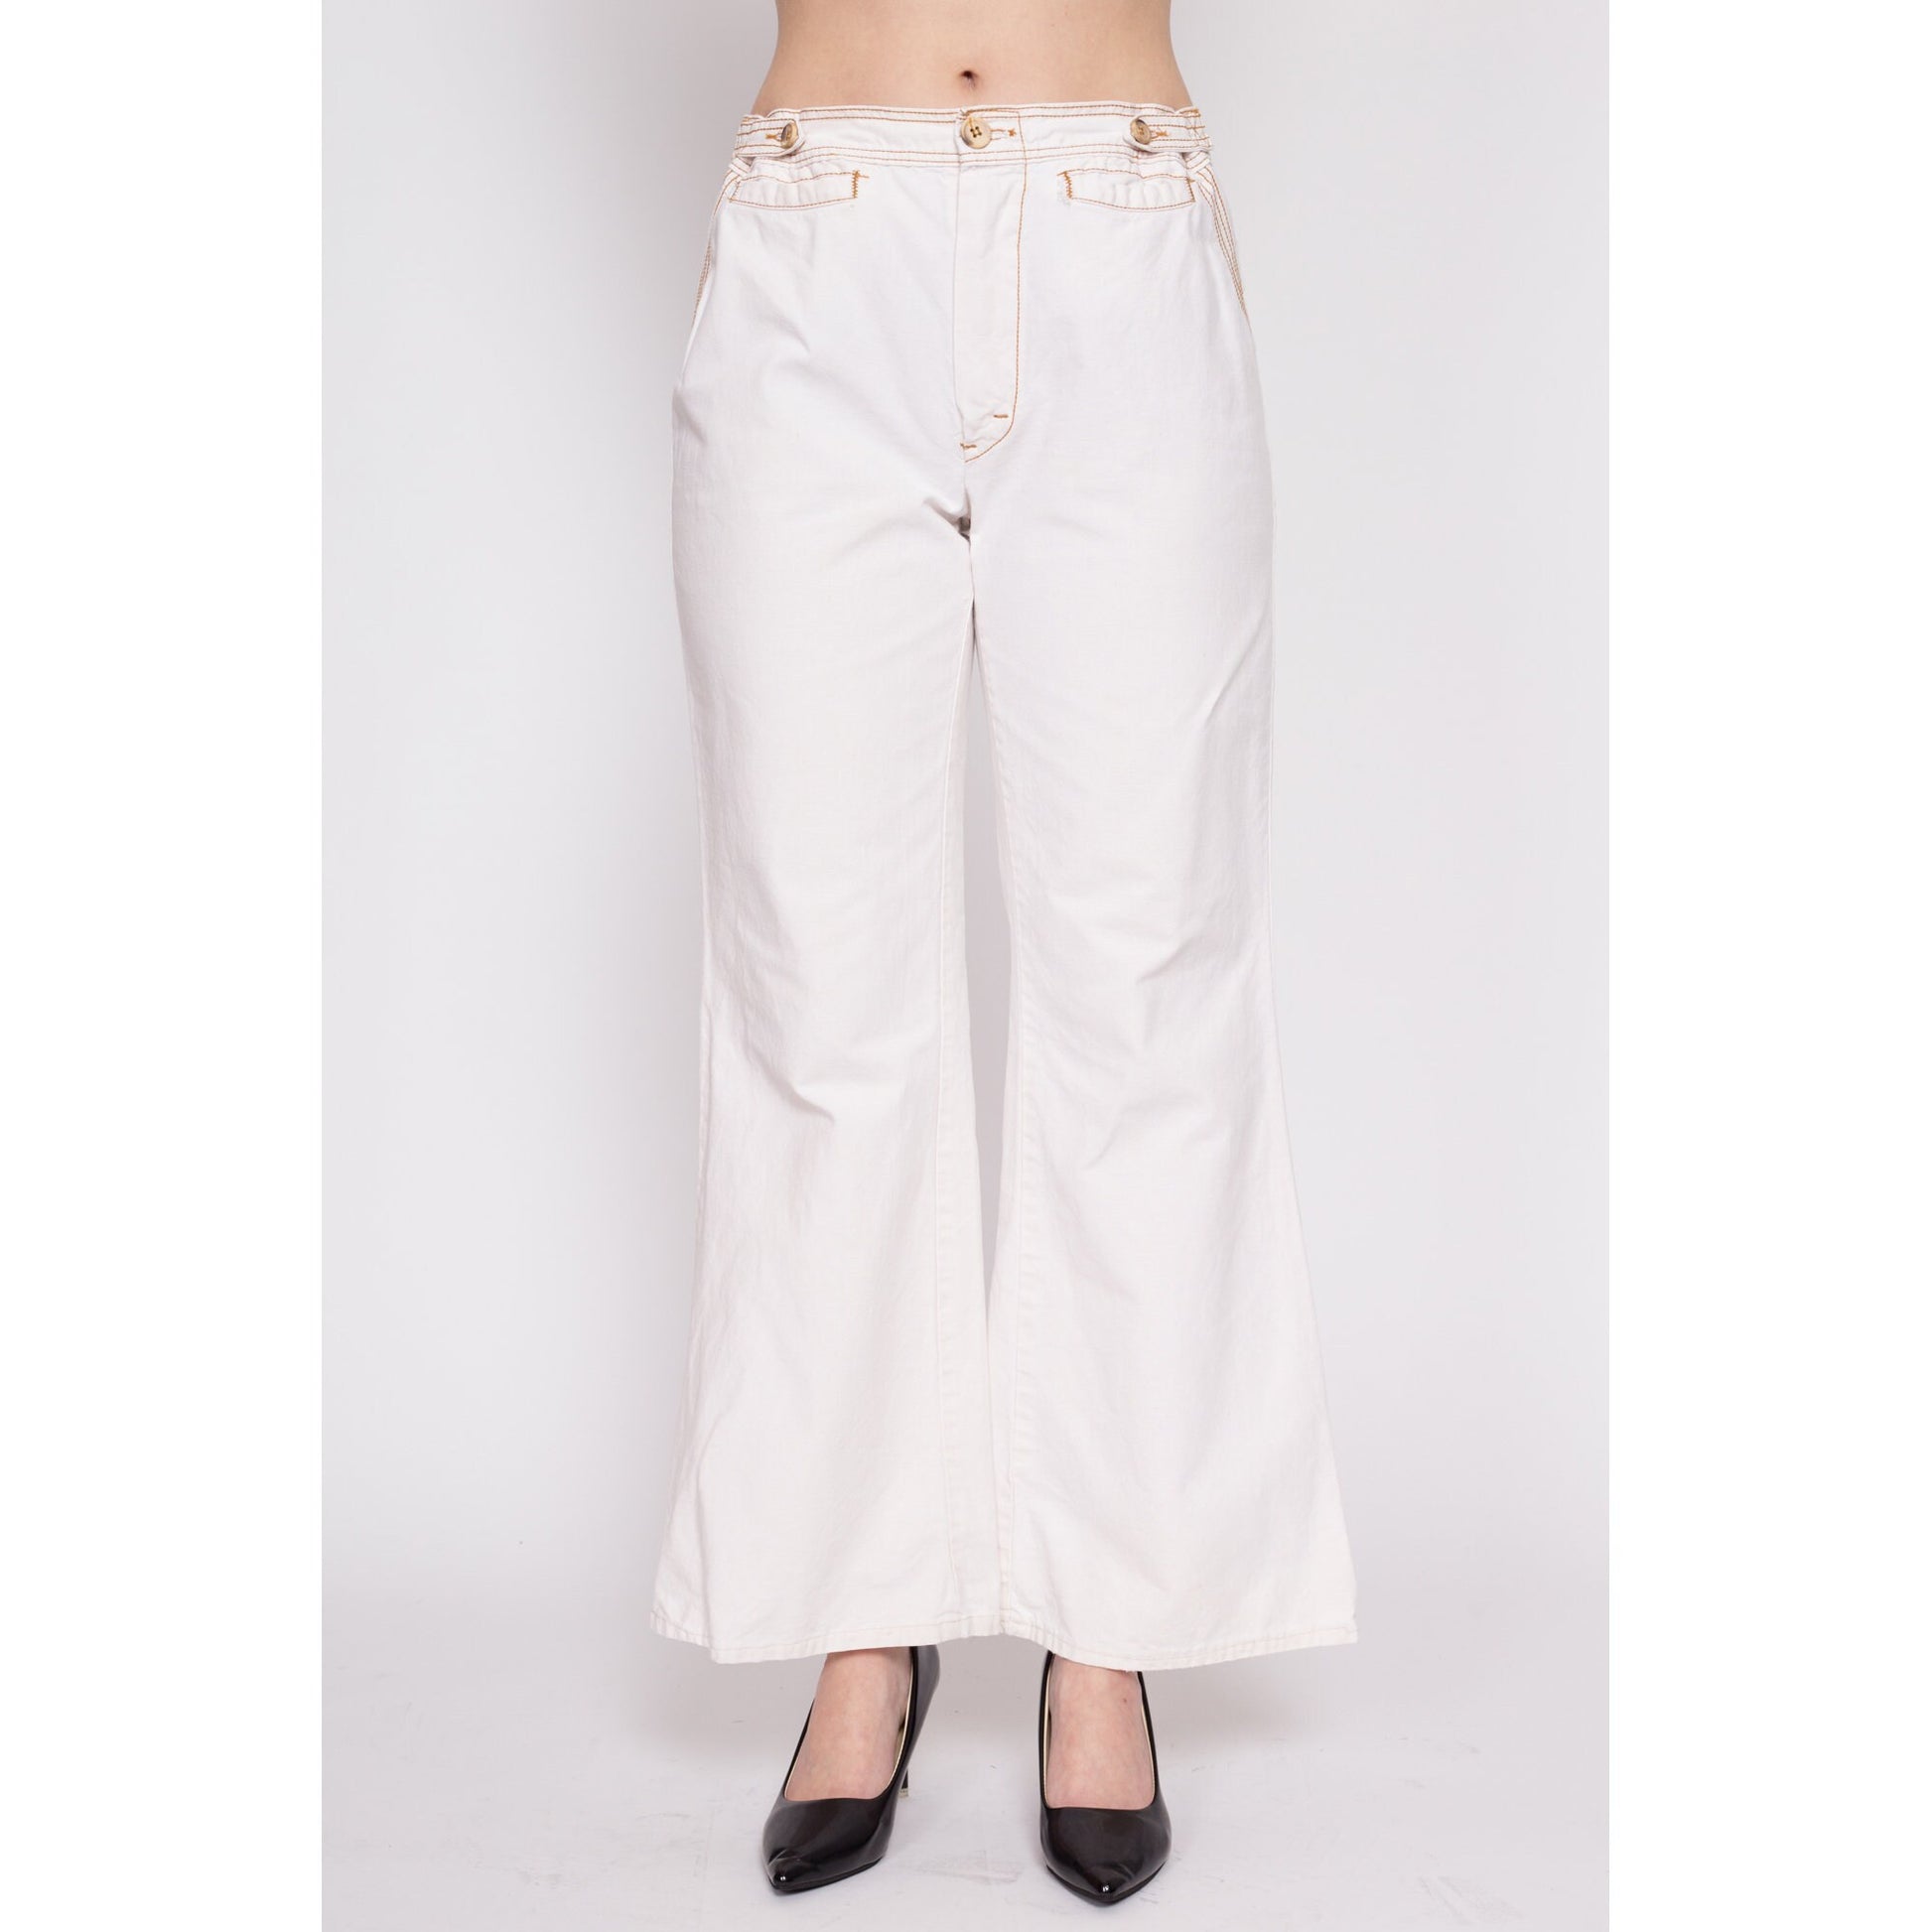 70s White Cotton Contrast Stitch Bell Bottoms - Men's Small, Women's M –  Flying Apple Vintage